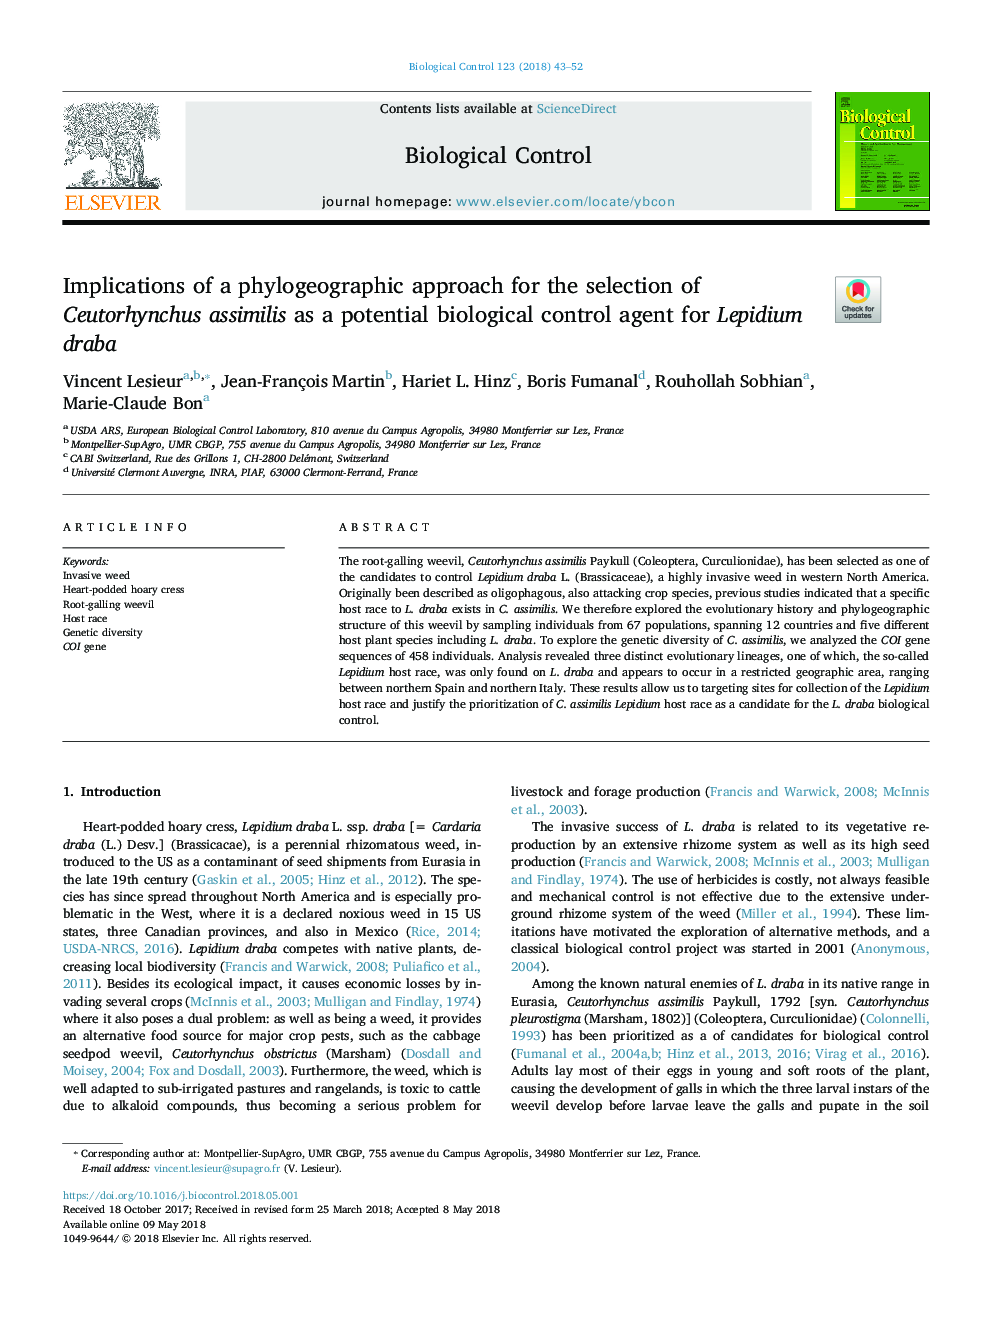 Implications of a phylogeographic approach for the selection of Ceutorhynchus assimilis as a potential biological control agent for Lepidium draba